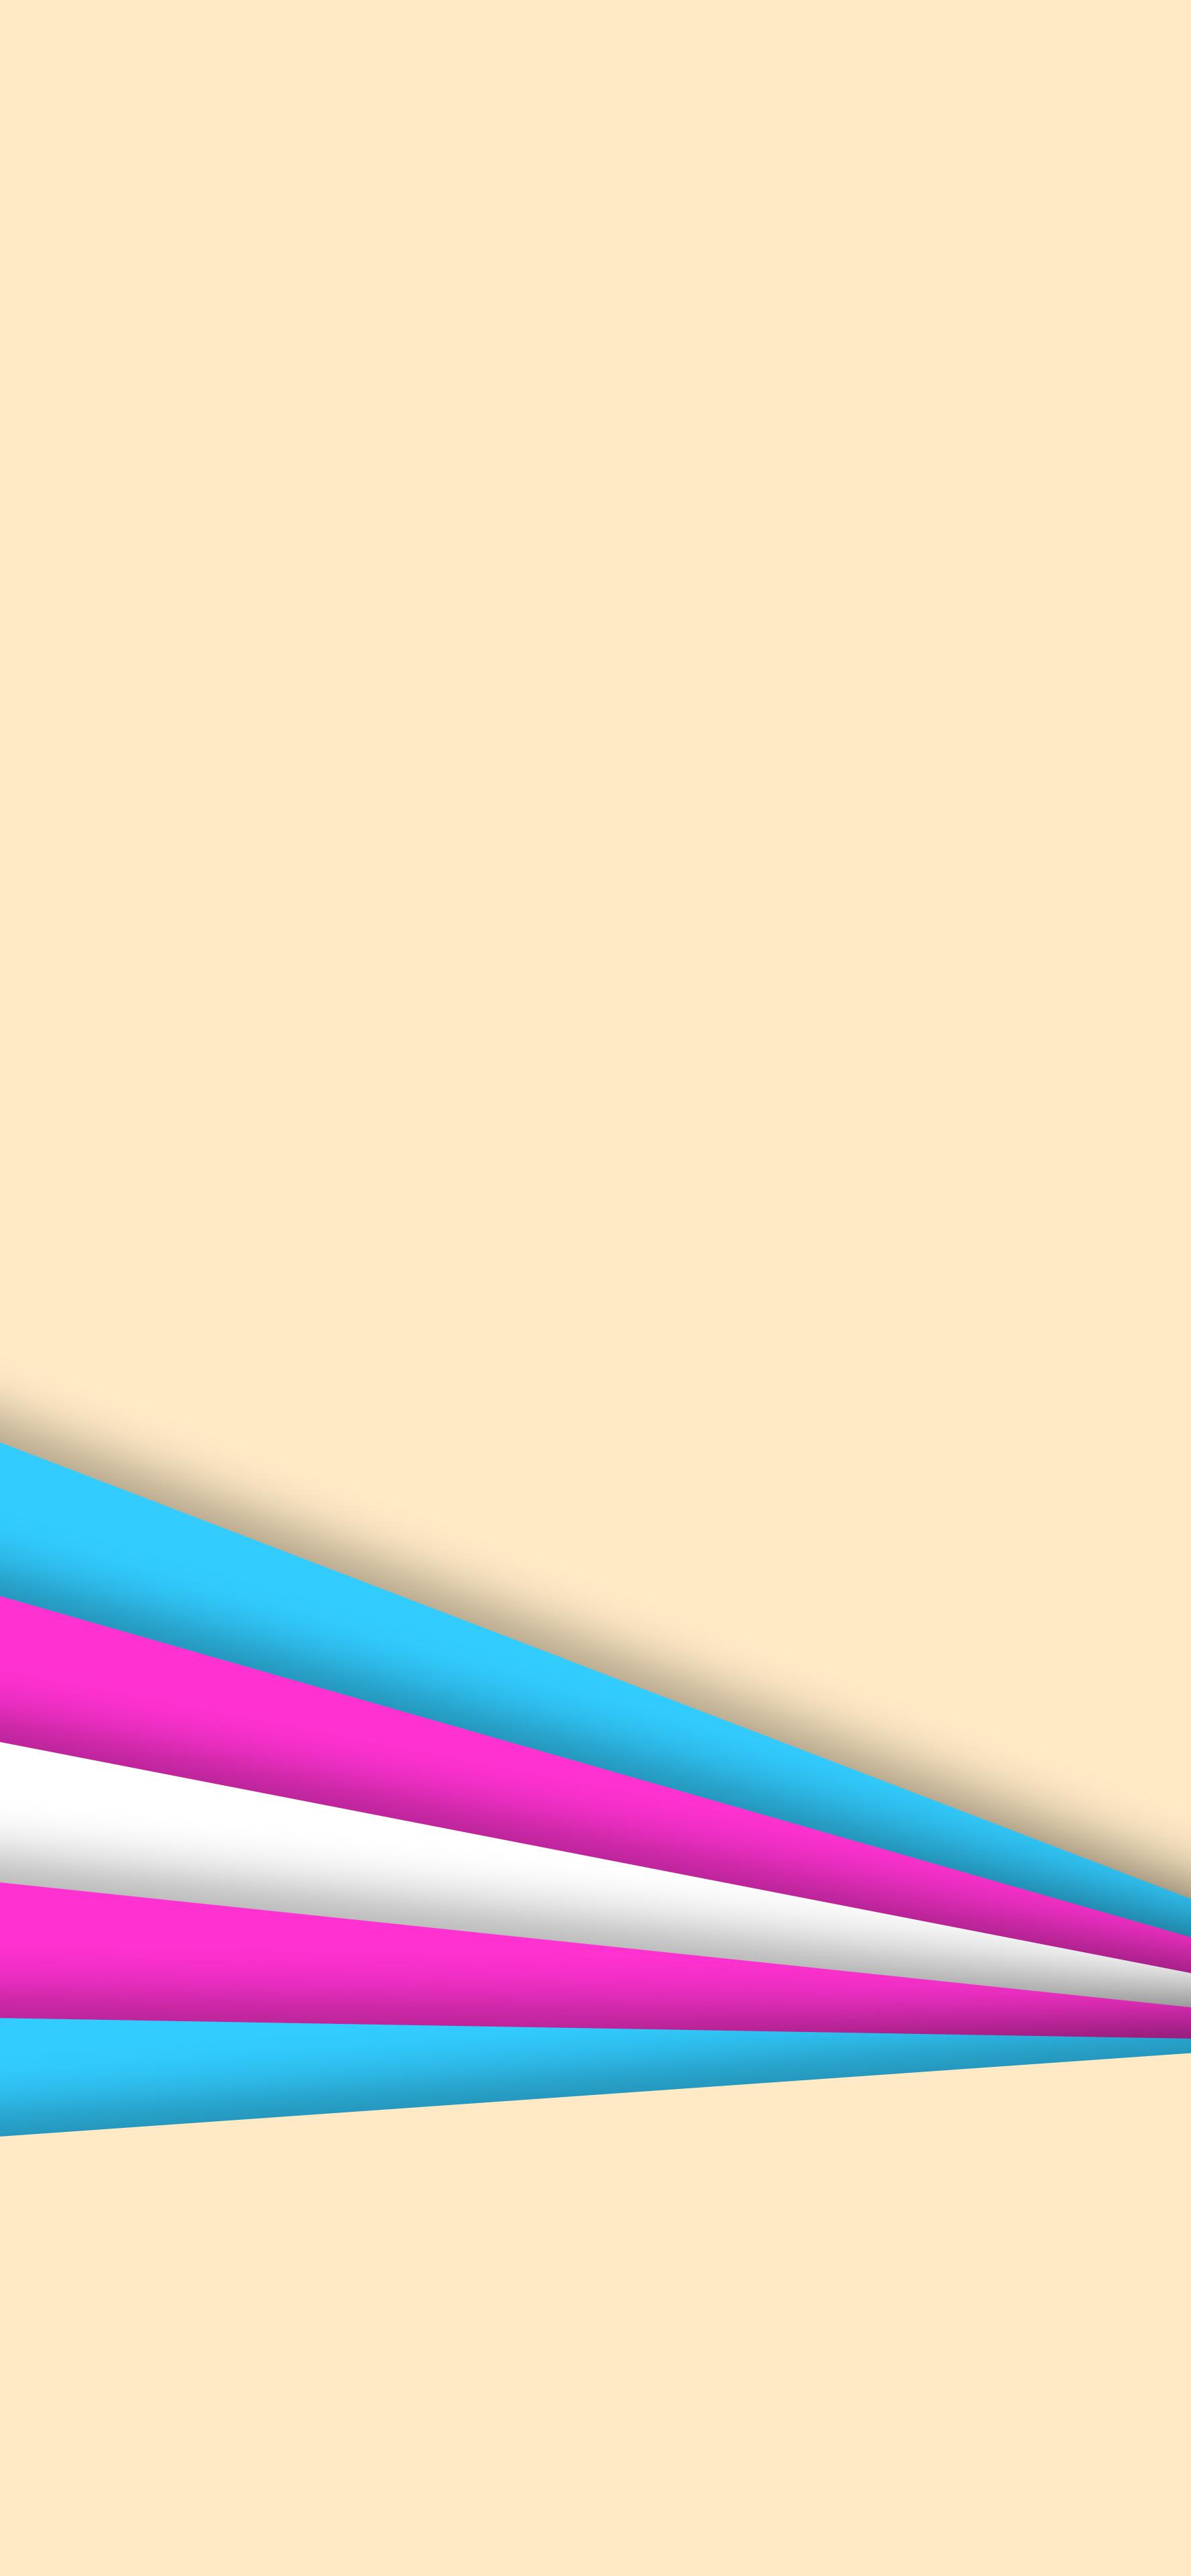 A colorful wallpaper with pink, blue, and white stripes. - Pride